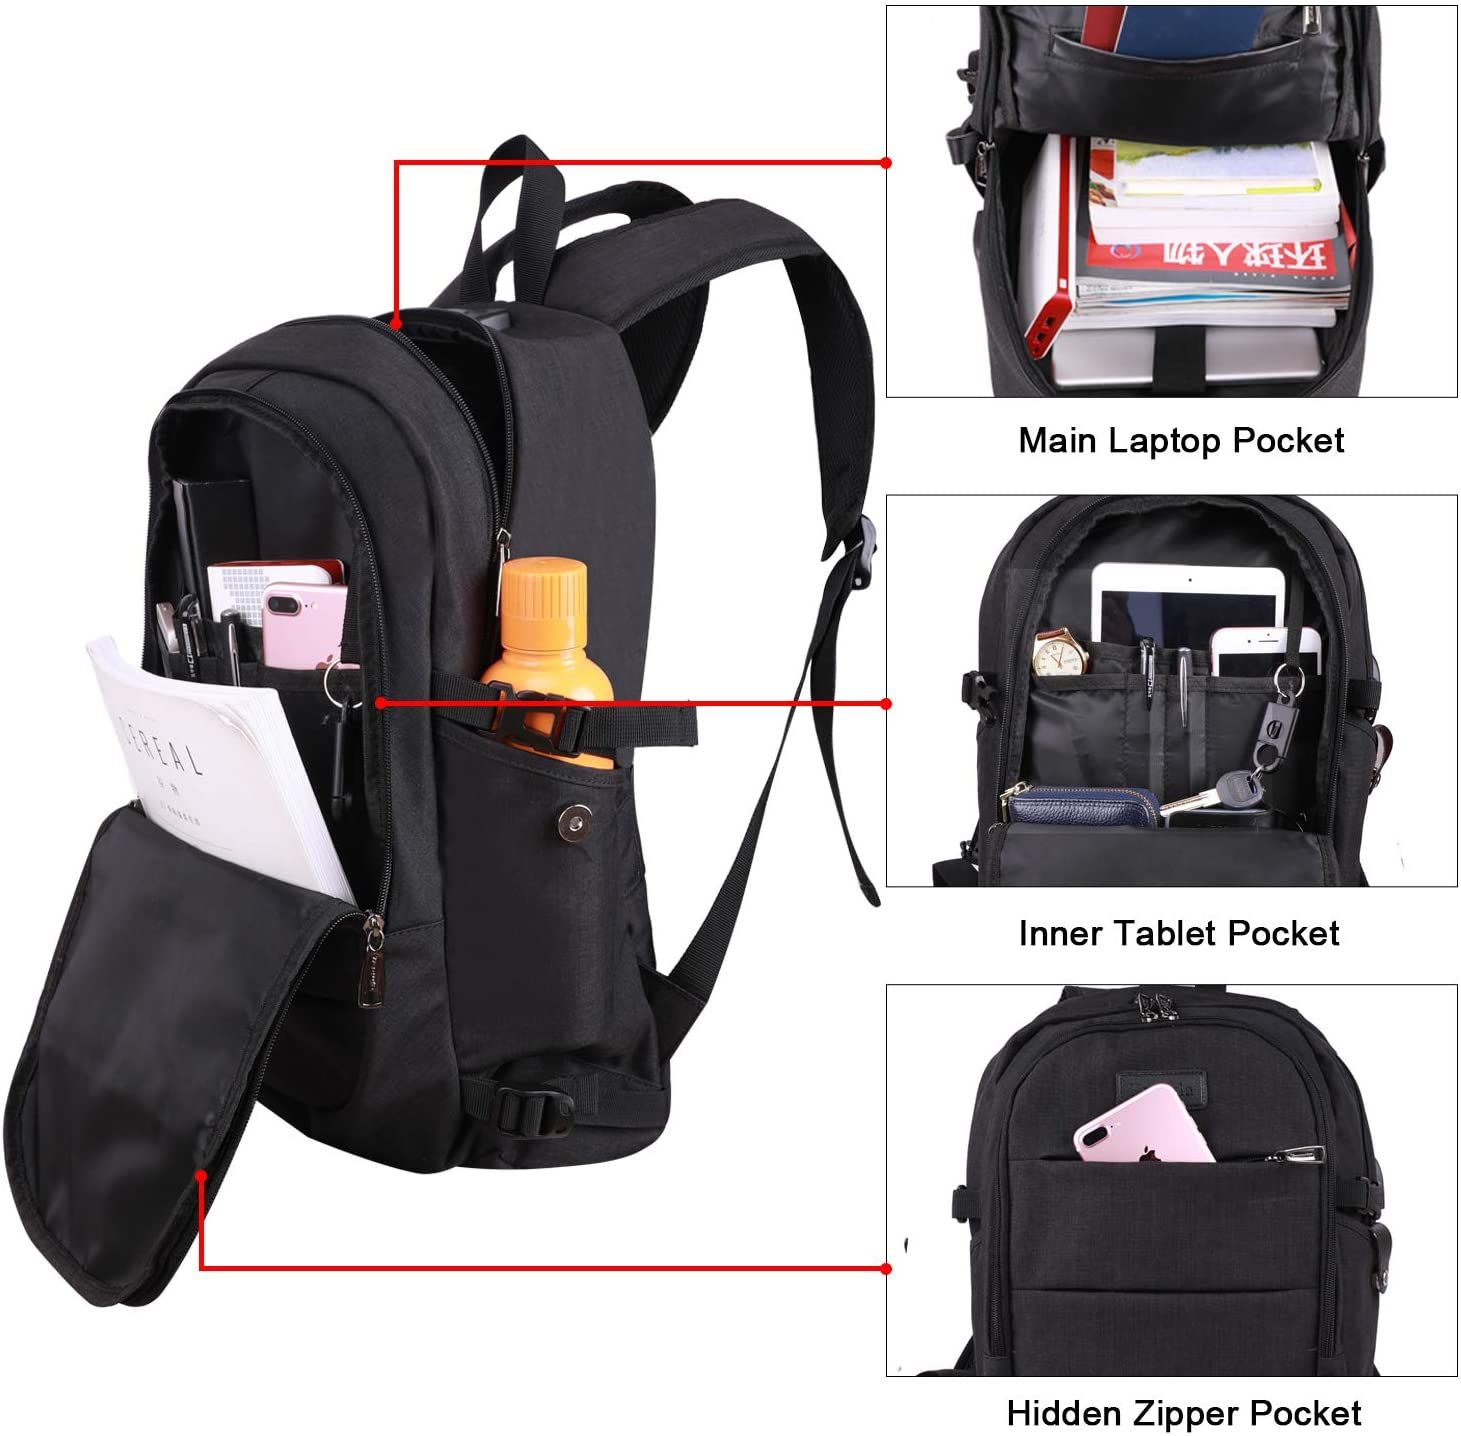 Tzowla Business Laptop Backpack compartments